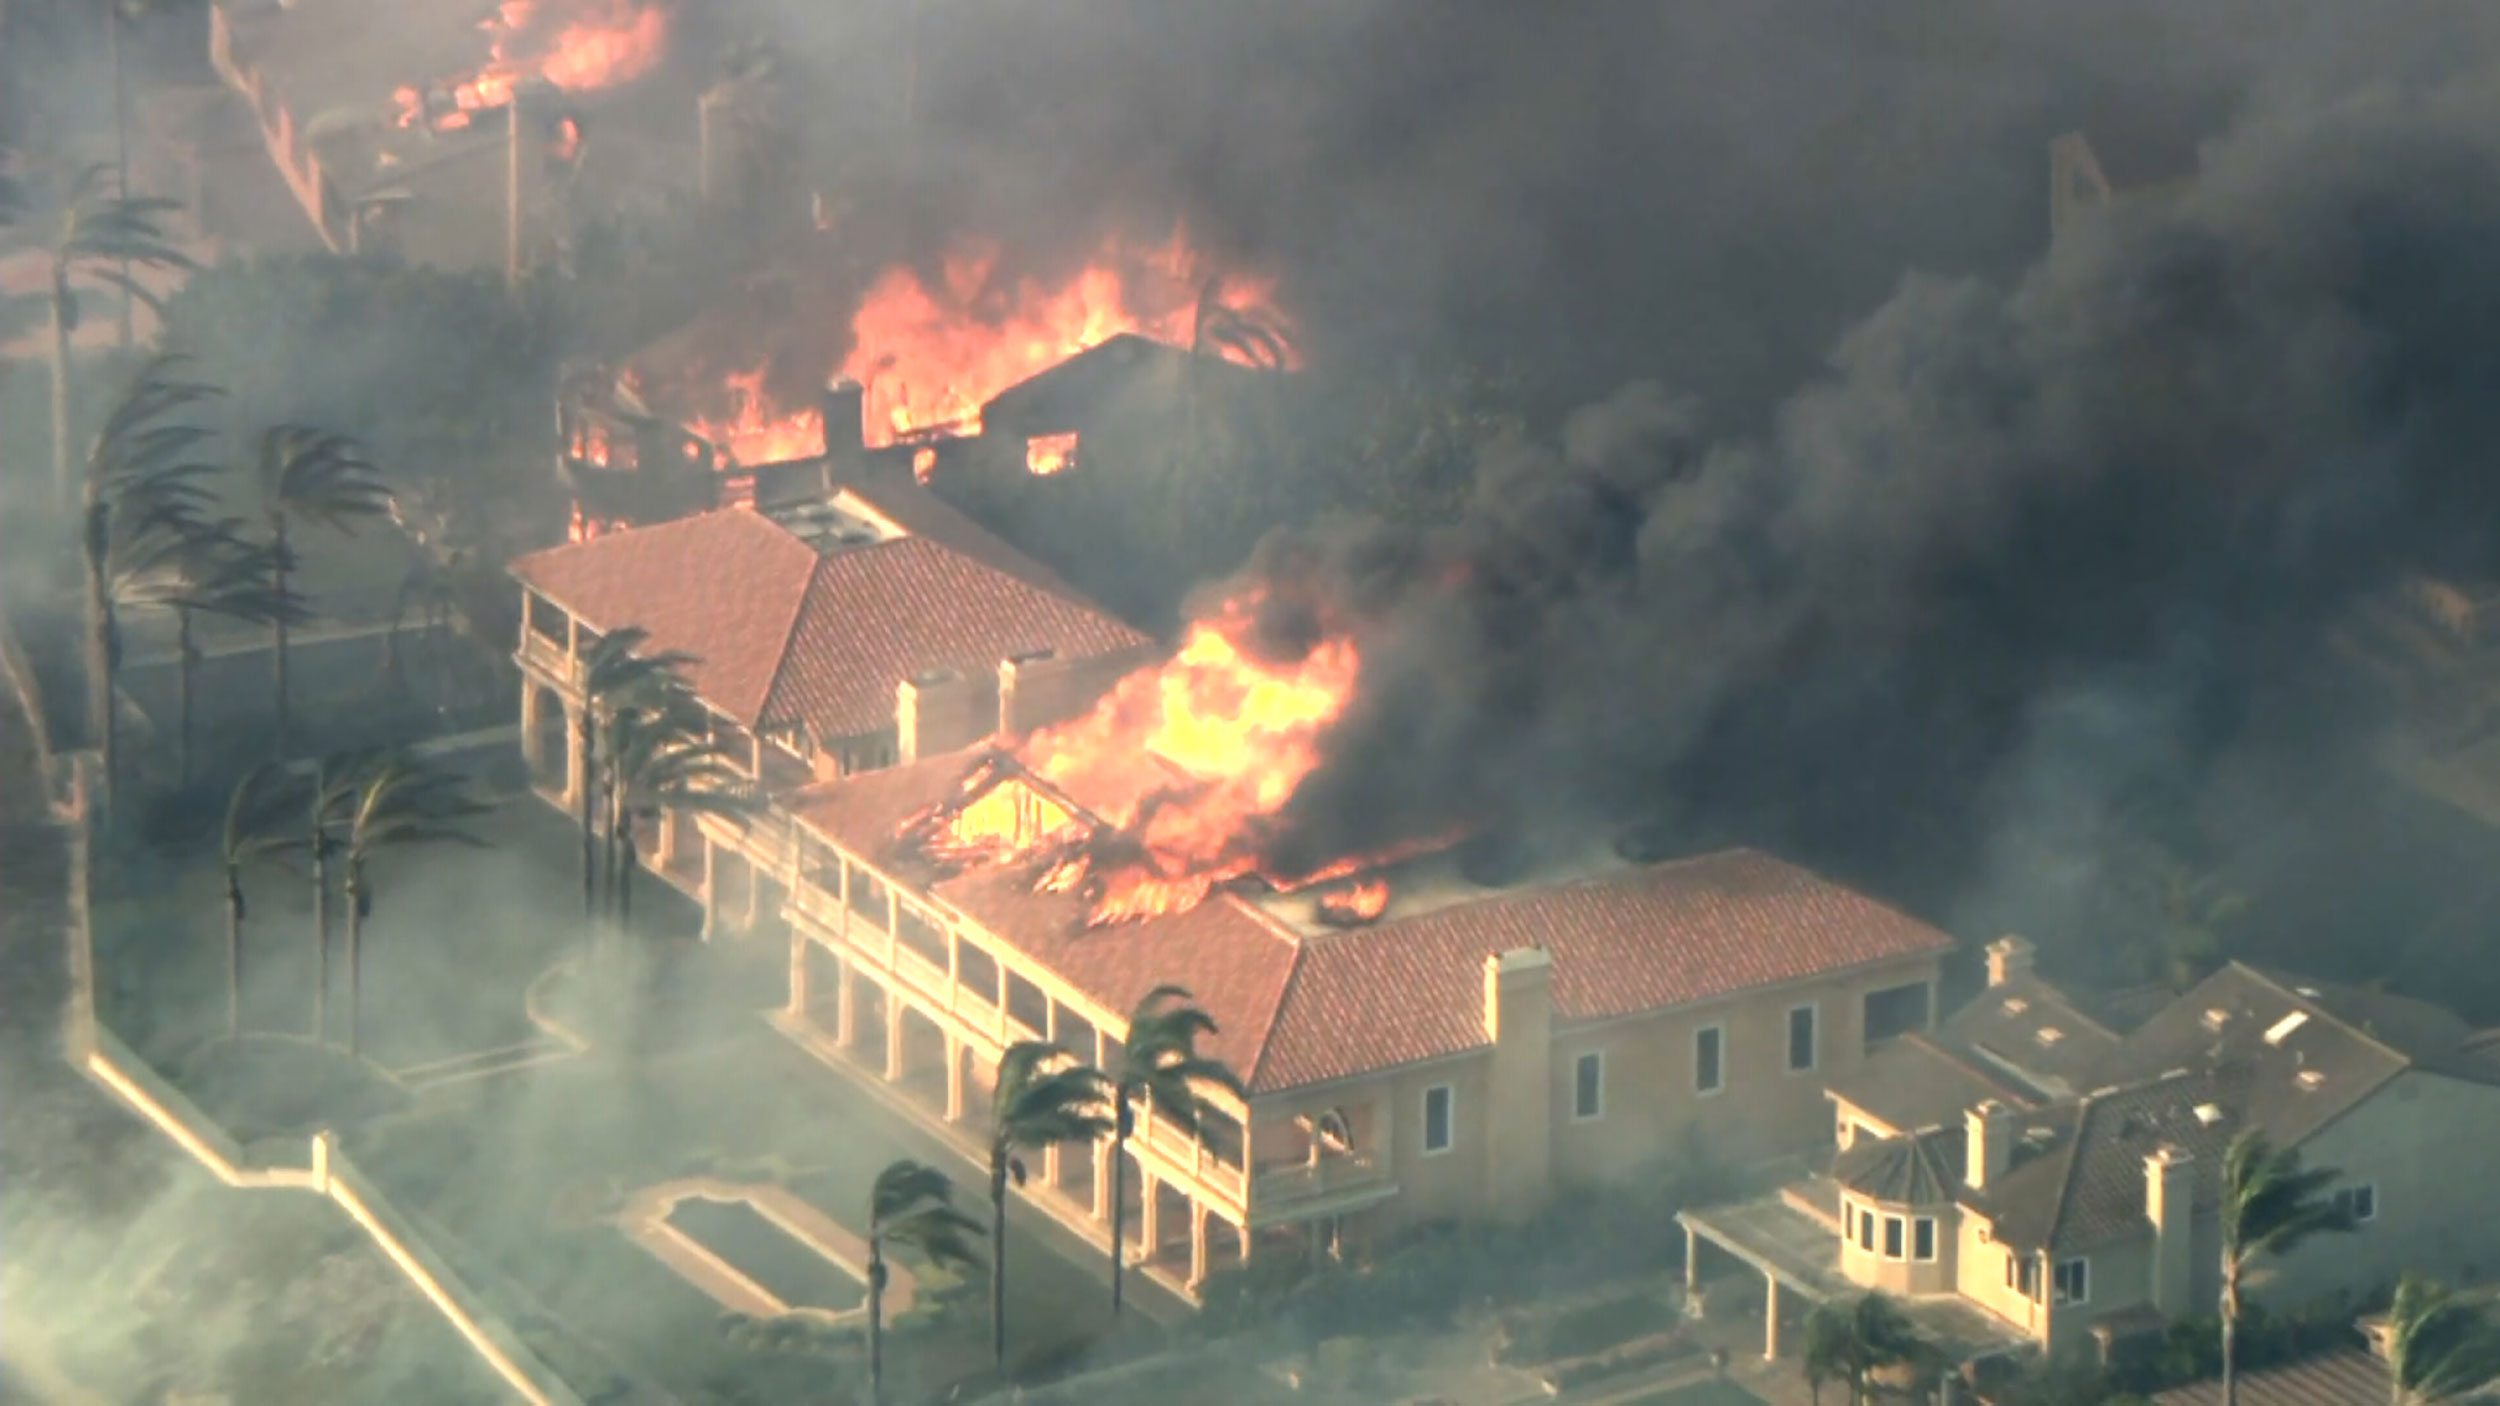 At least 20 homes in Southern California engulfed by a fast-moving blaze as authorities urge evacuations